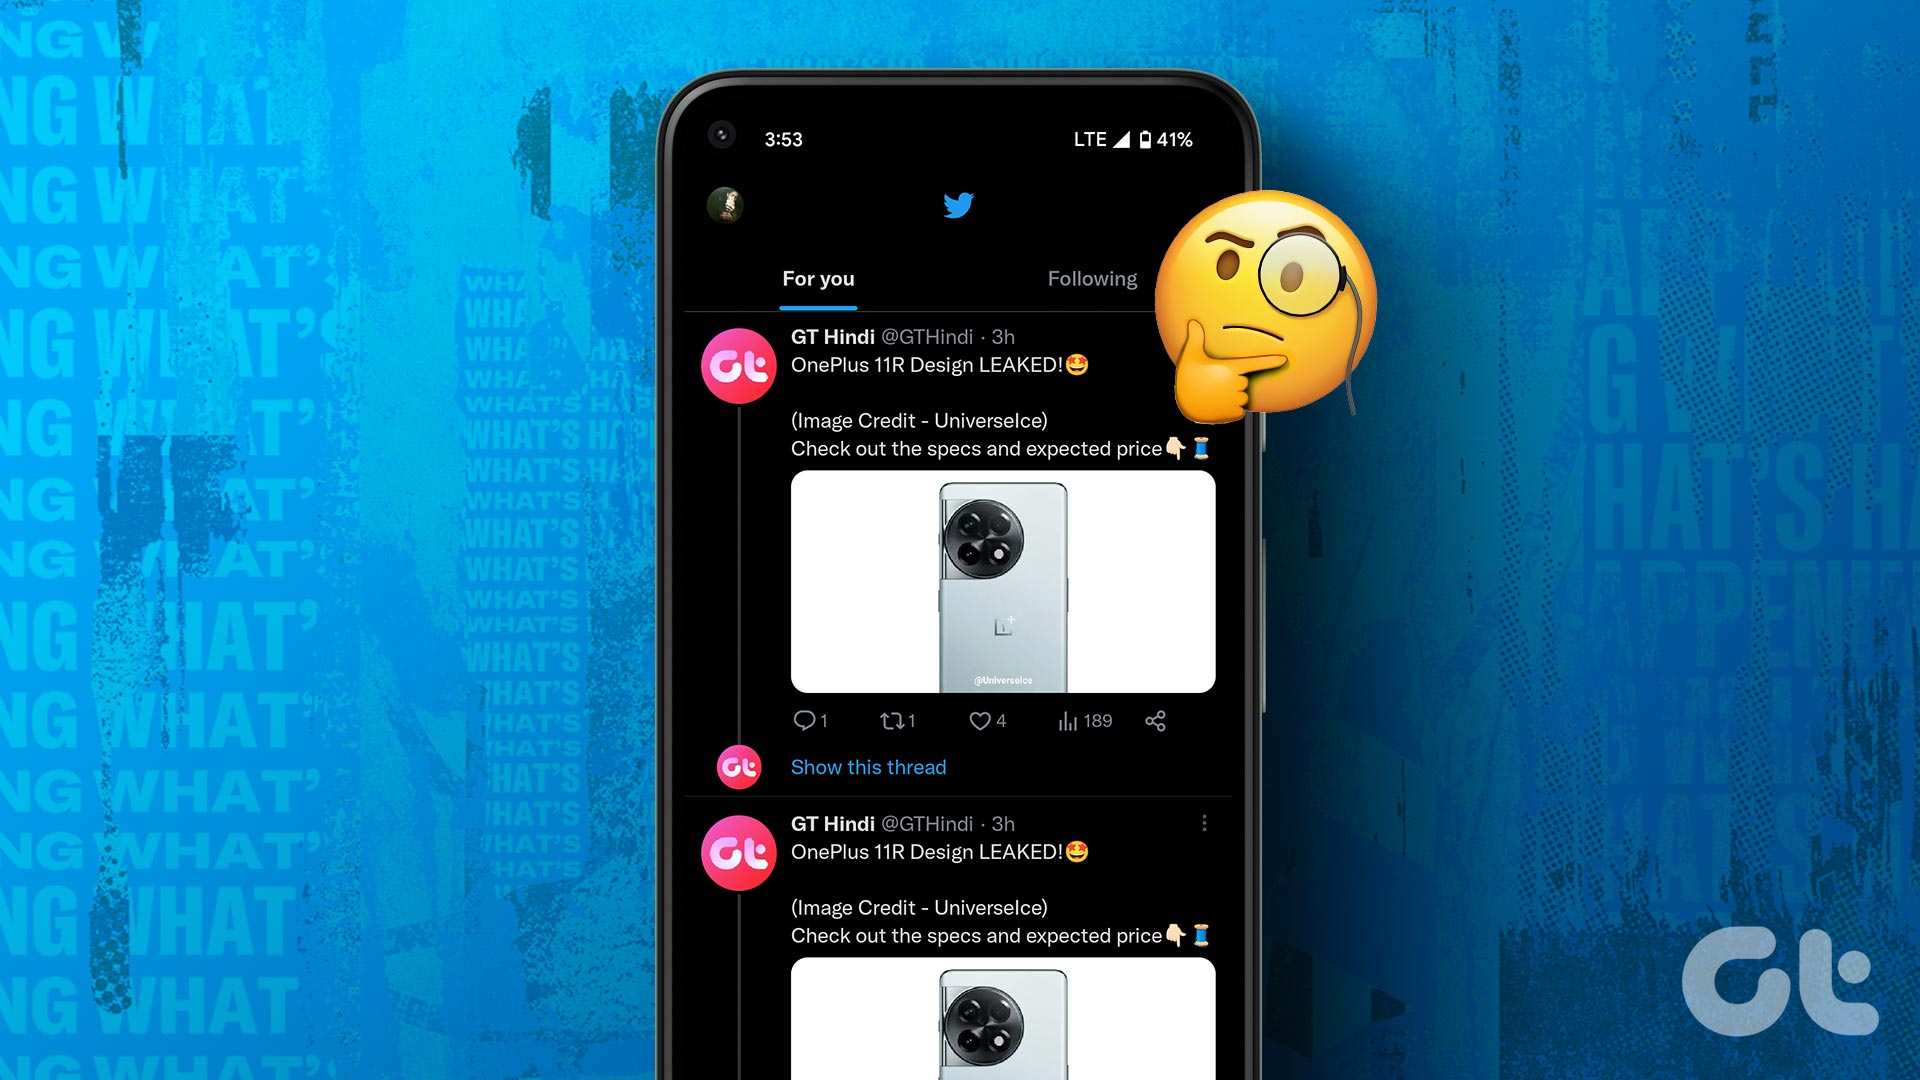 How to Fix Same Tweets Repeating on Twitter Timeline on iPhone and Android